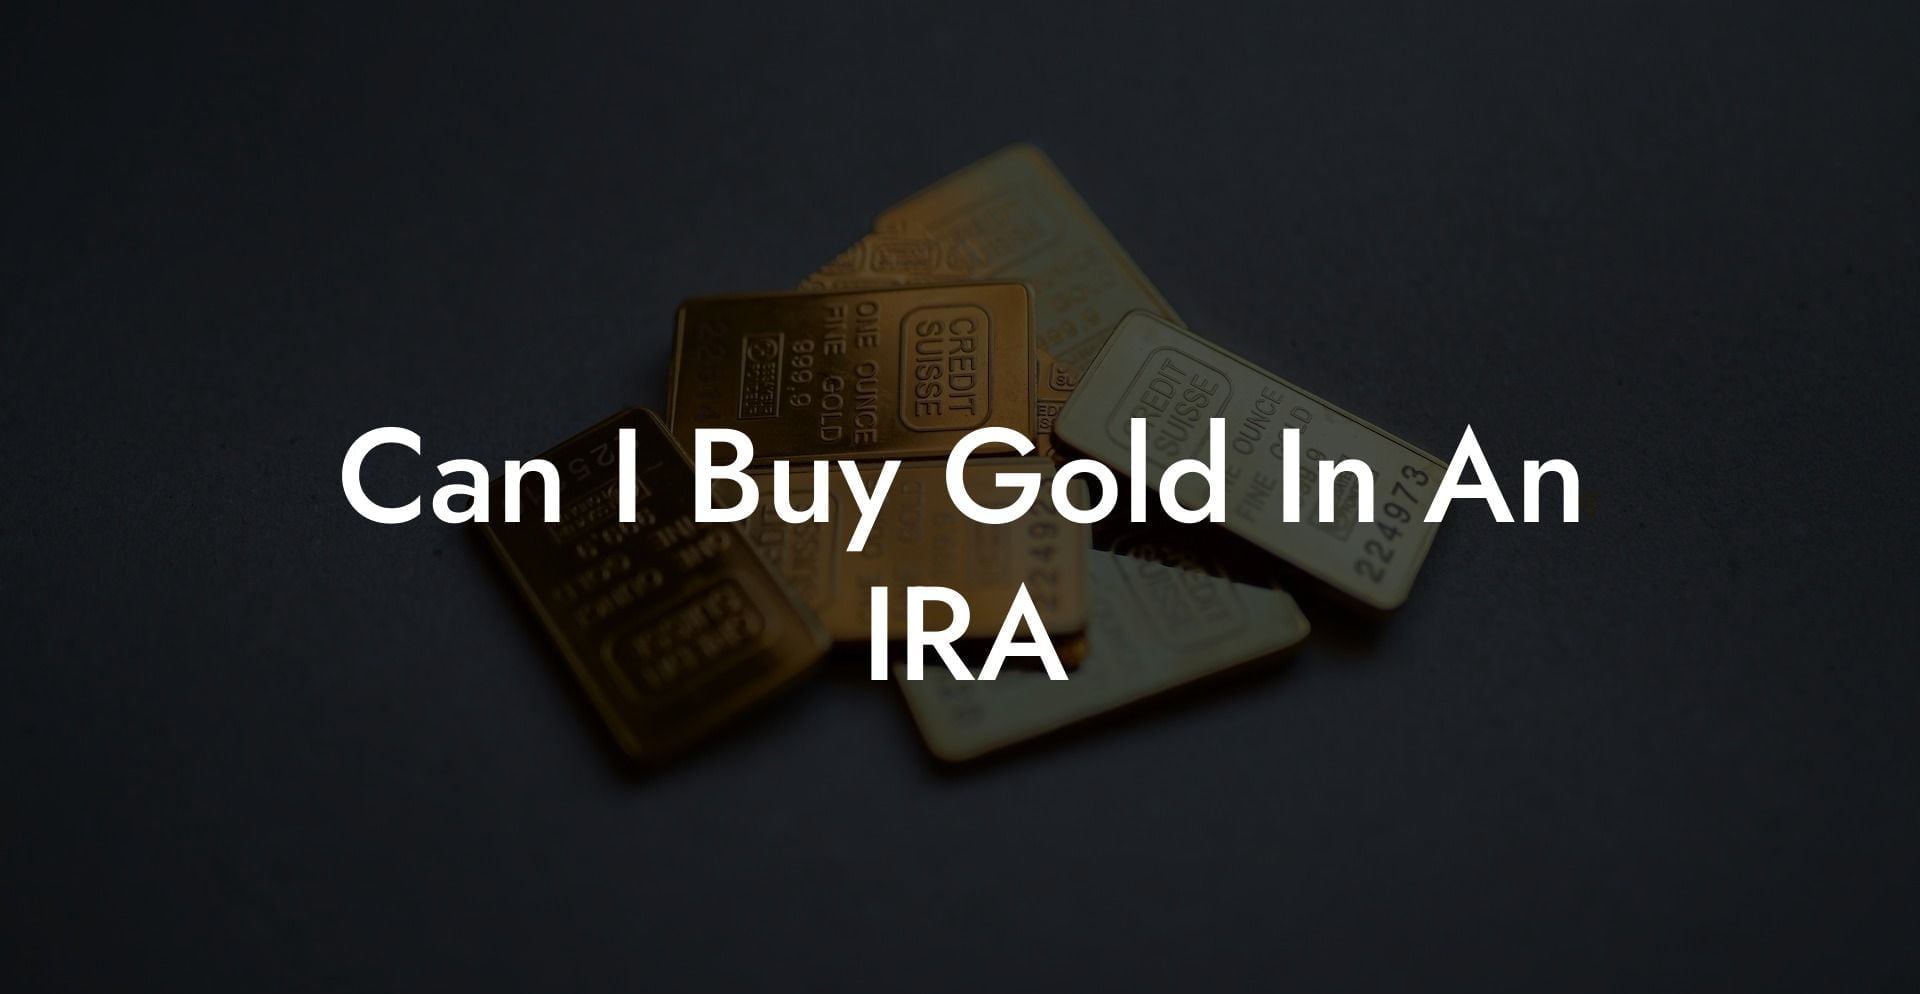 Can I Buy Gold In An IRA